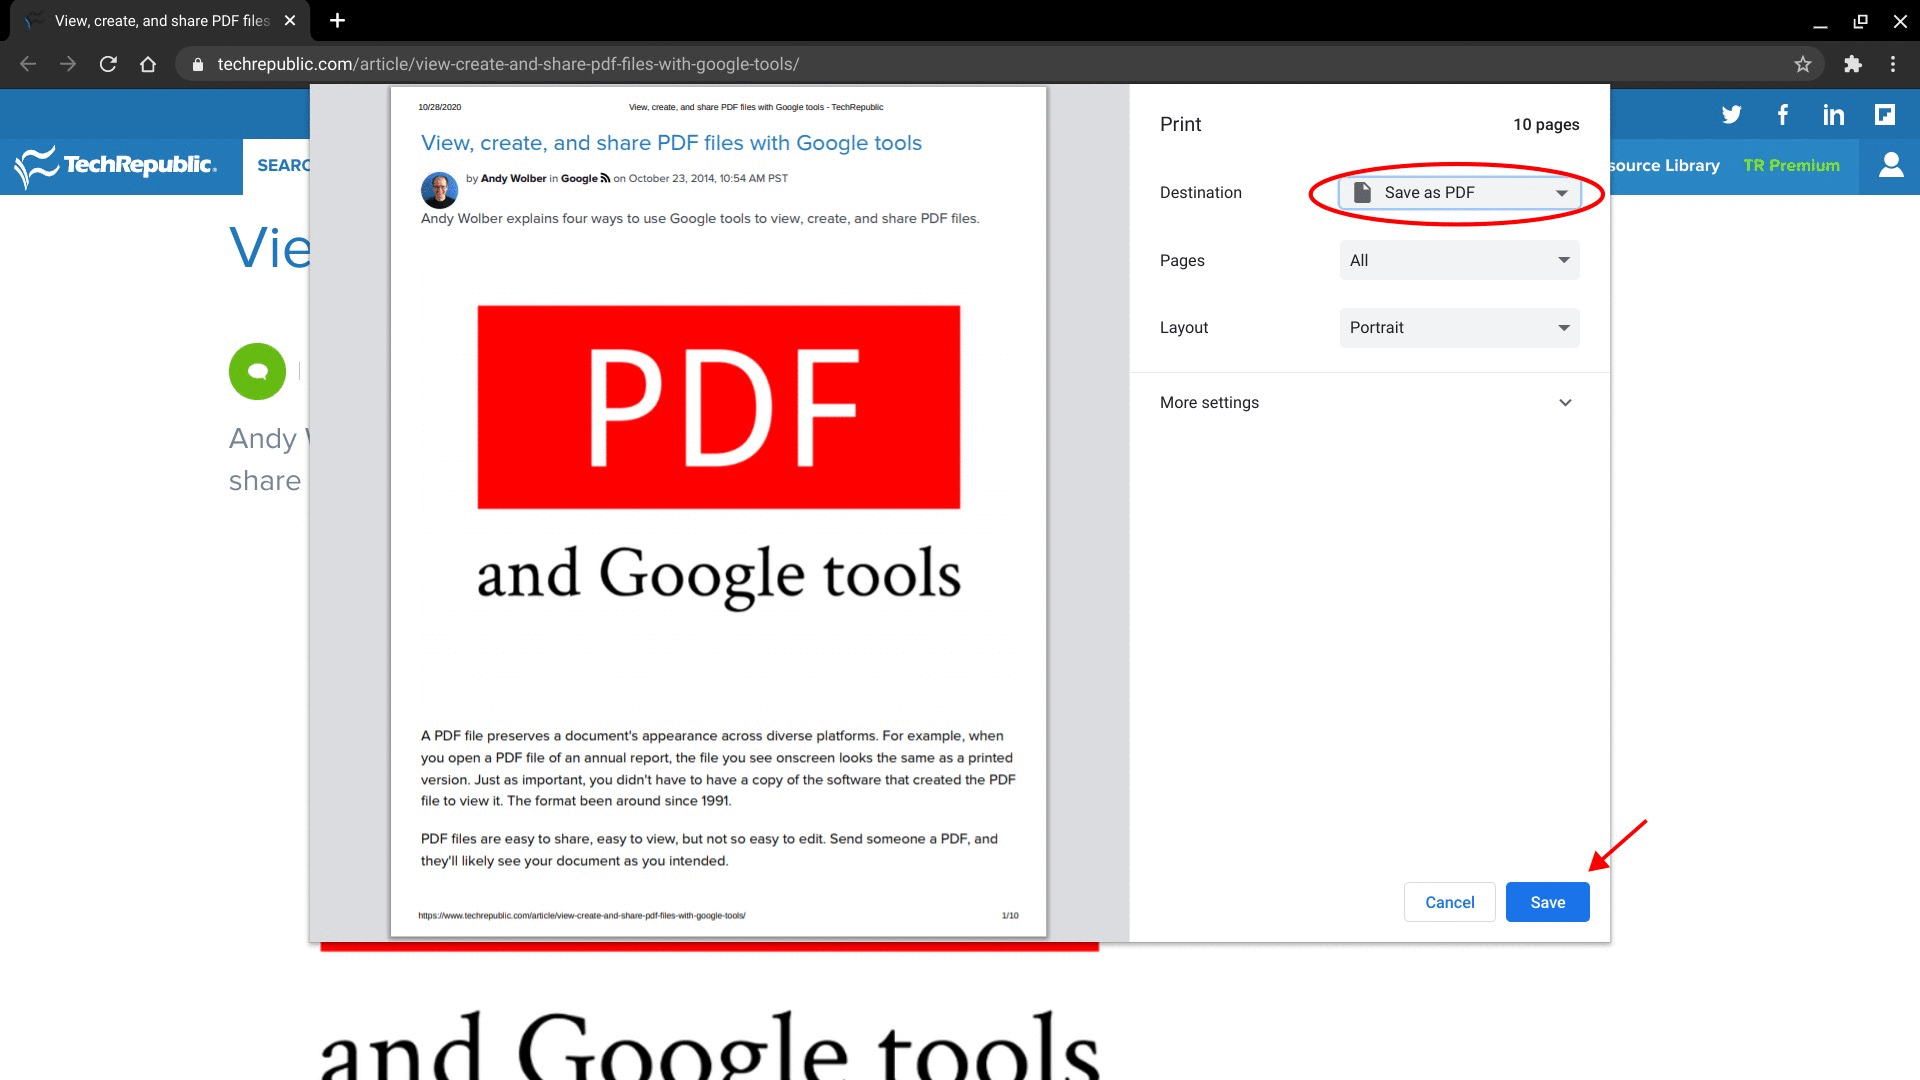 GIF alternating between Chrome three-dot menu with Print option, and the print details with the Save as PDF option displayed.